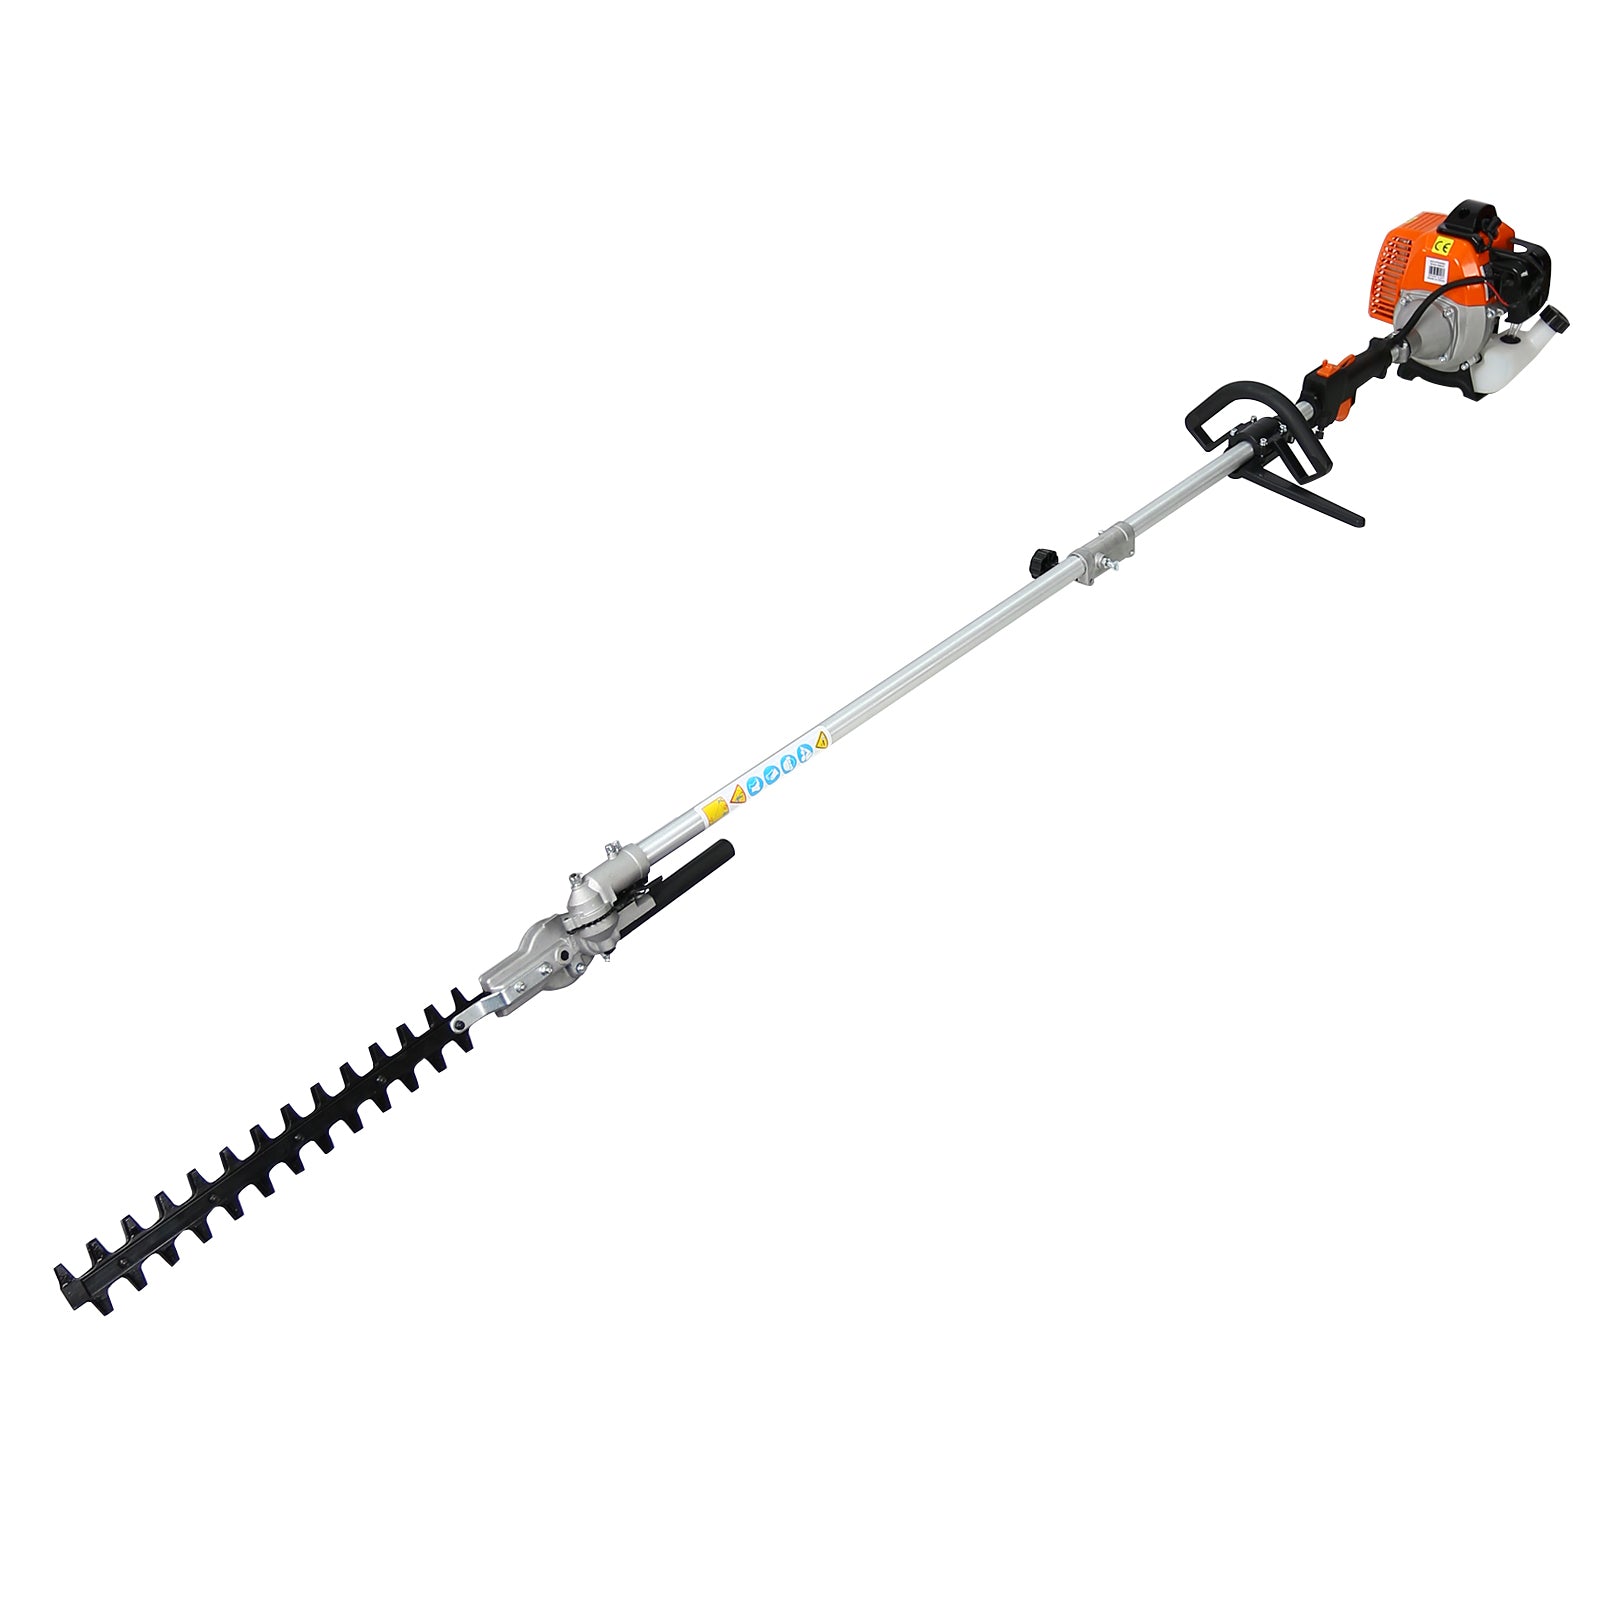 12 in 1 Multi-Functional Trimming Tool, 52CC 2-Cycle Garden Tool System with Gas Pole Saw, Hedge Trimmer, Grass Trimmer, and Brush Cutter EPA Compliant - Tonkn